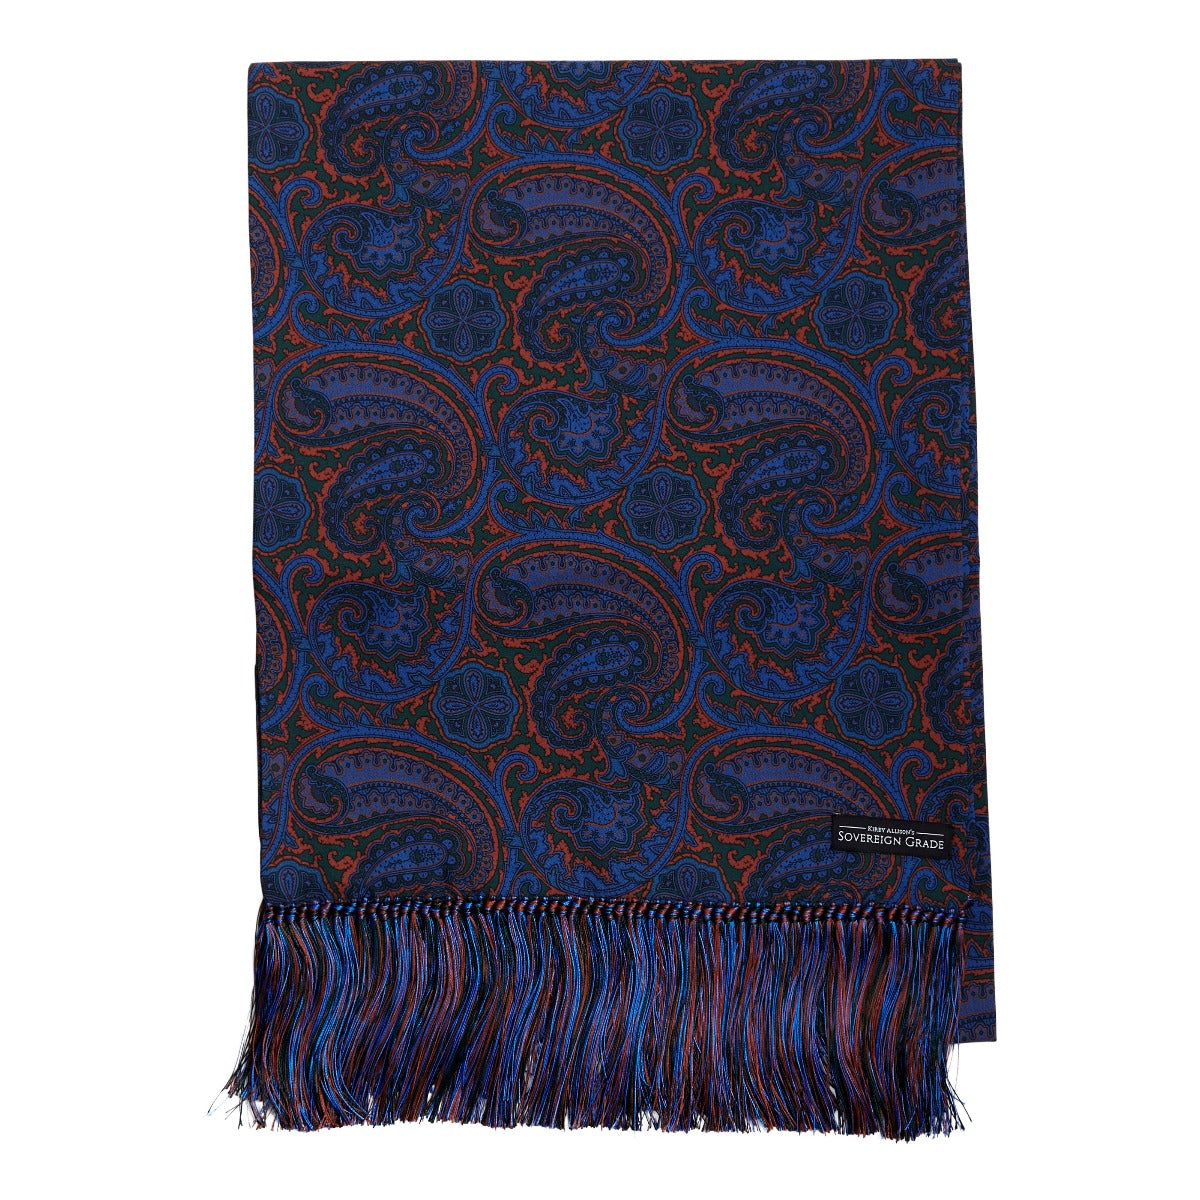 A Sovereign Grade Ancient Madder Printed Silk Scarf from KirbyAllison.com, perfect as a winter accessory.